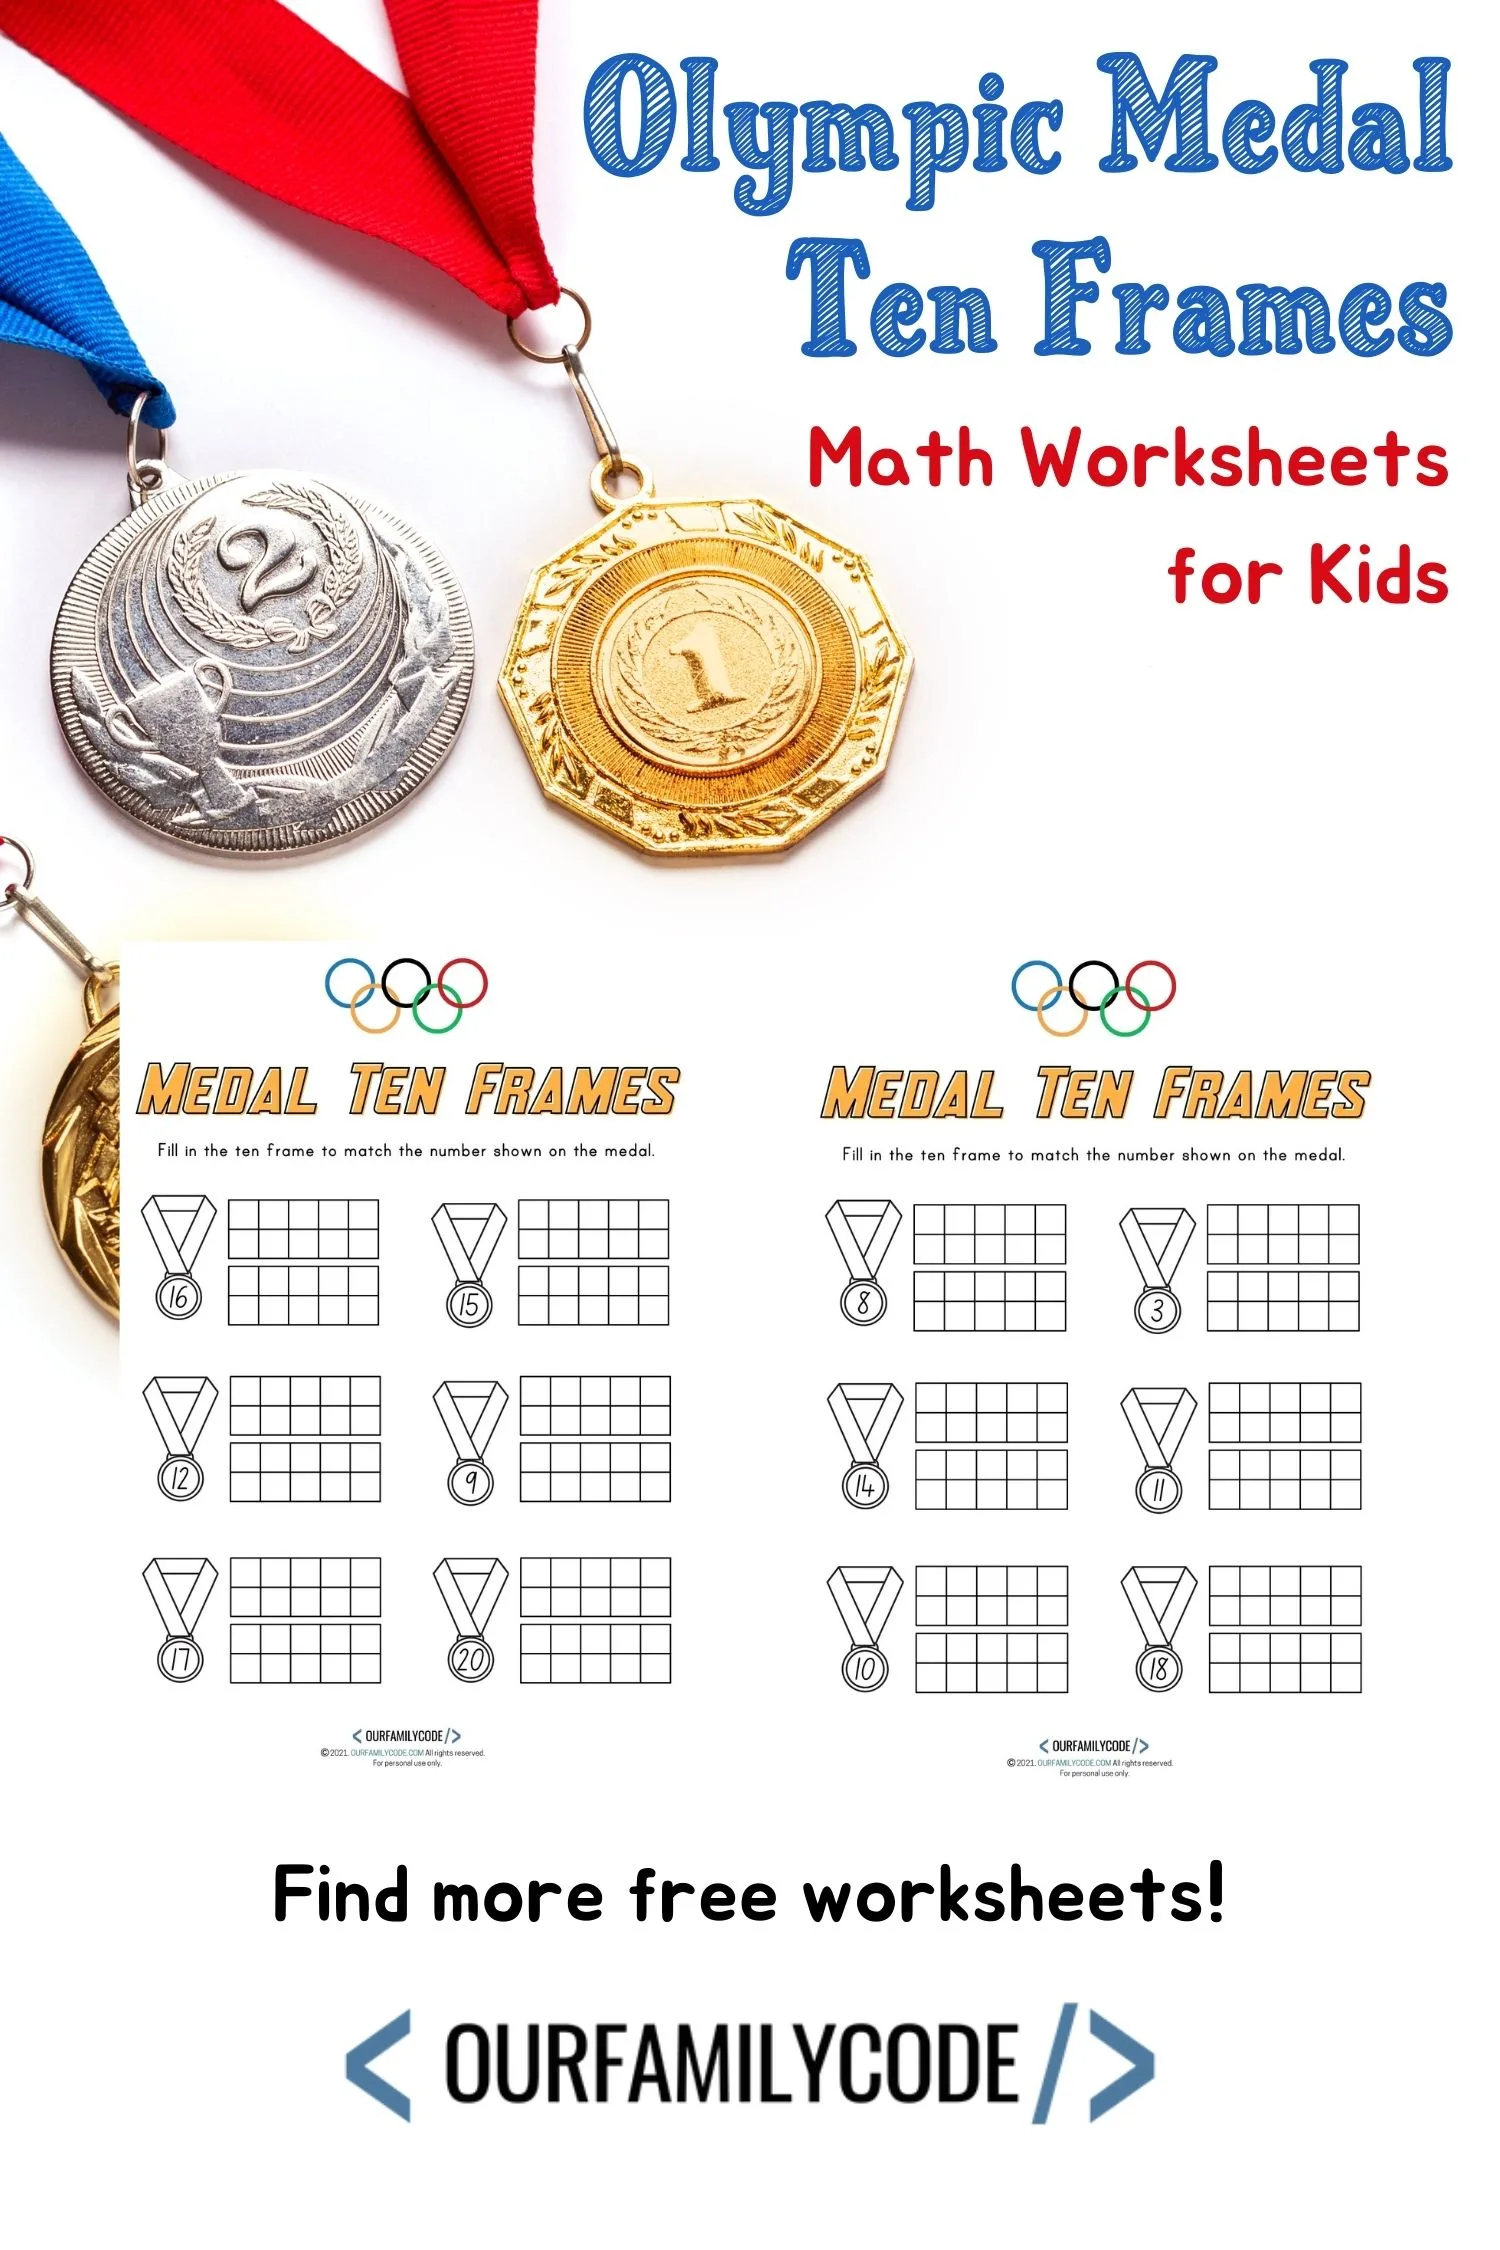 A picture of two Olympic Medal ten frames math worksheets on a white background with bronze gold and silver medals.